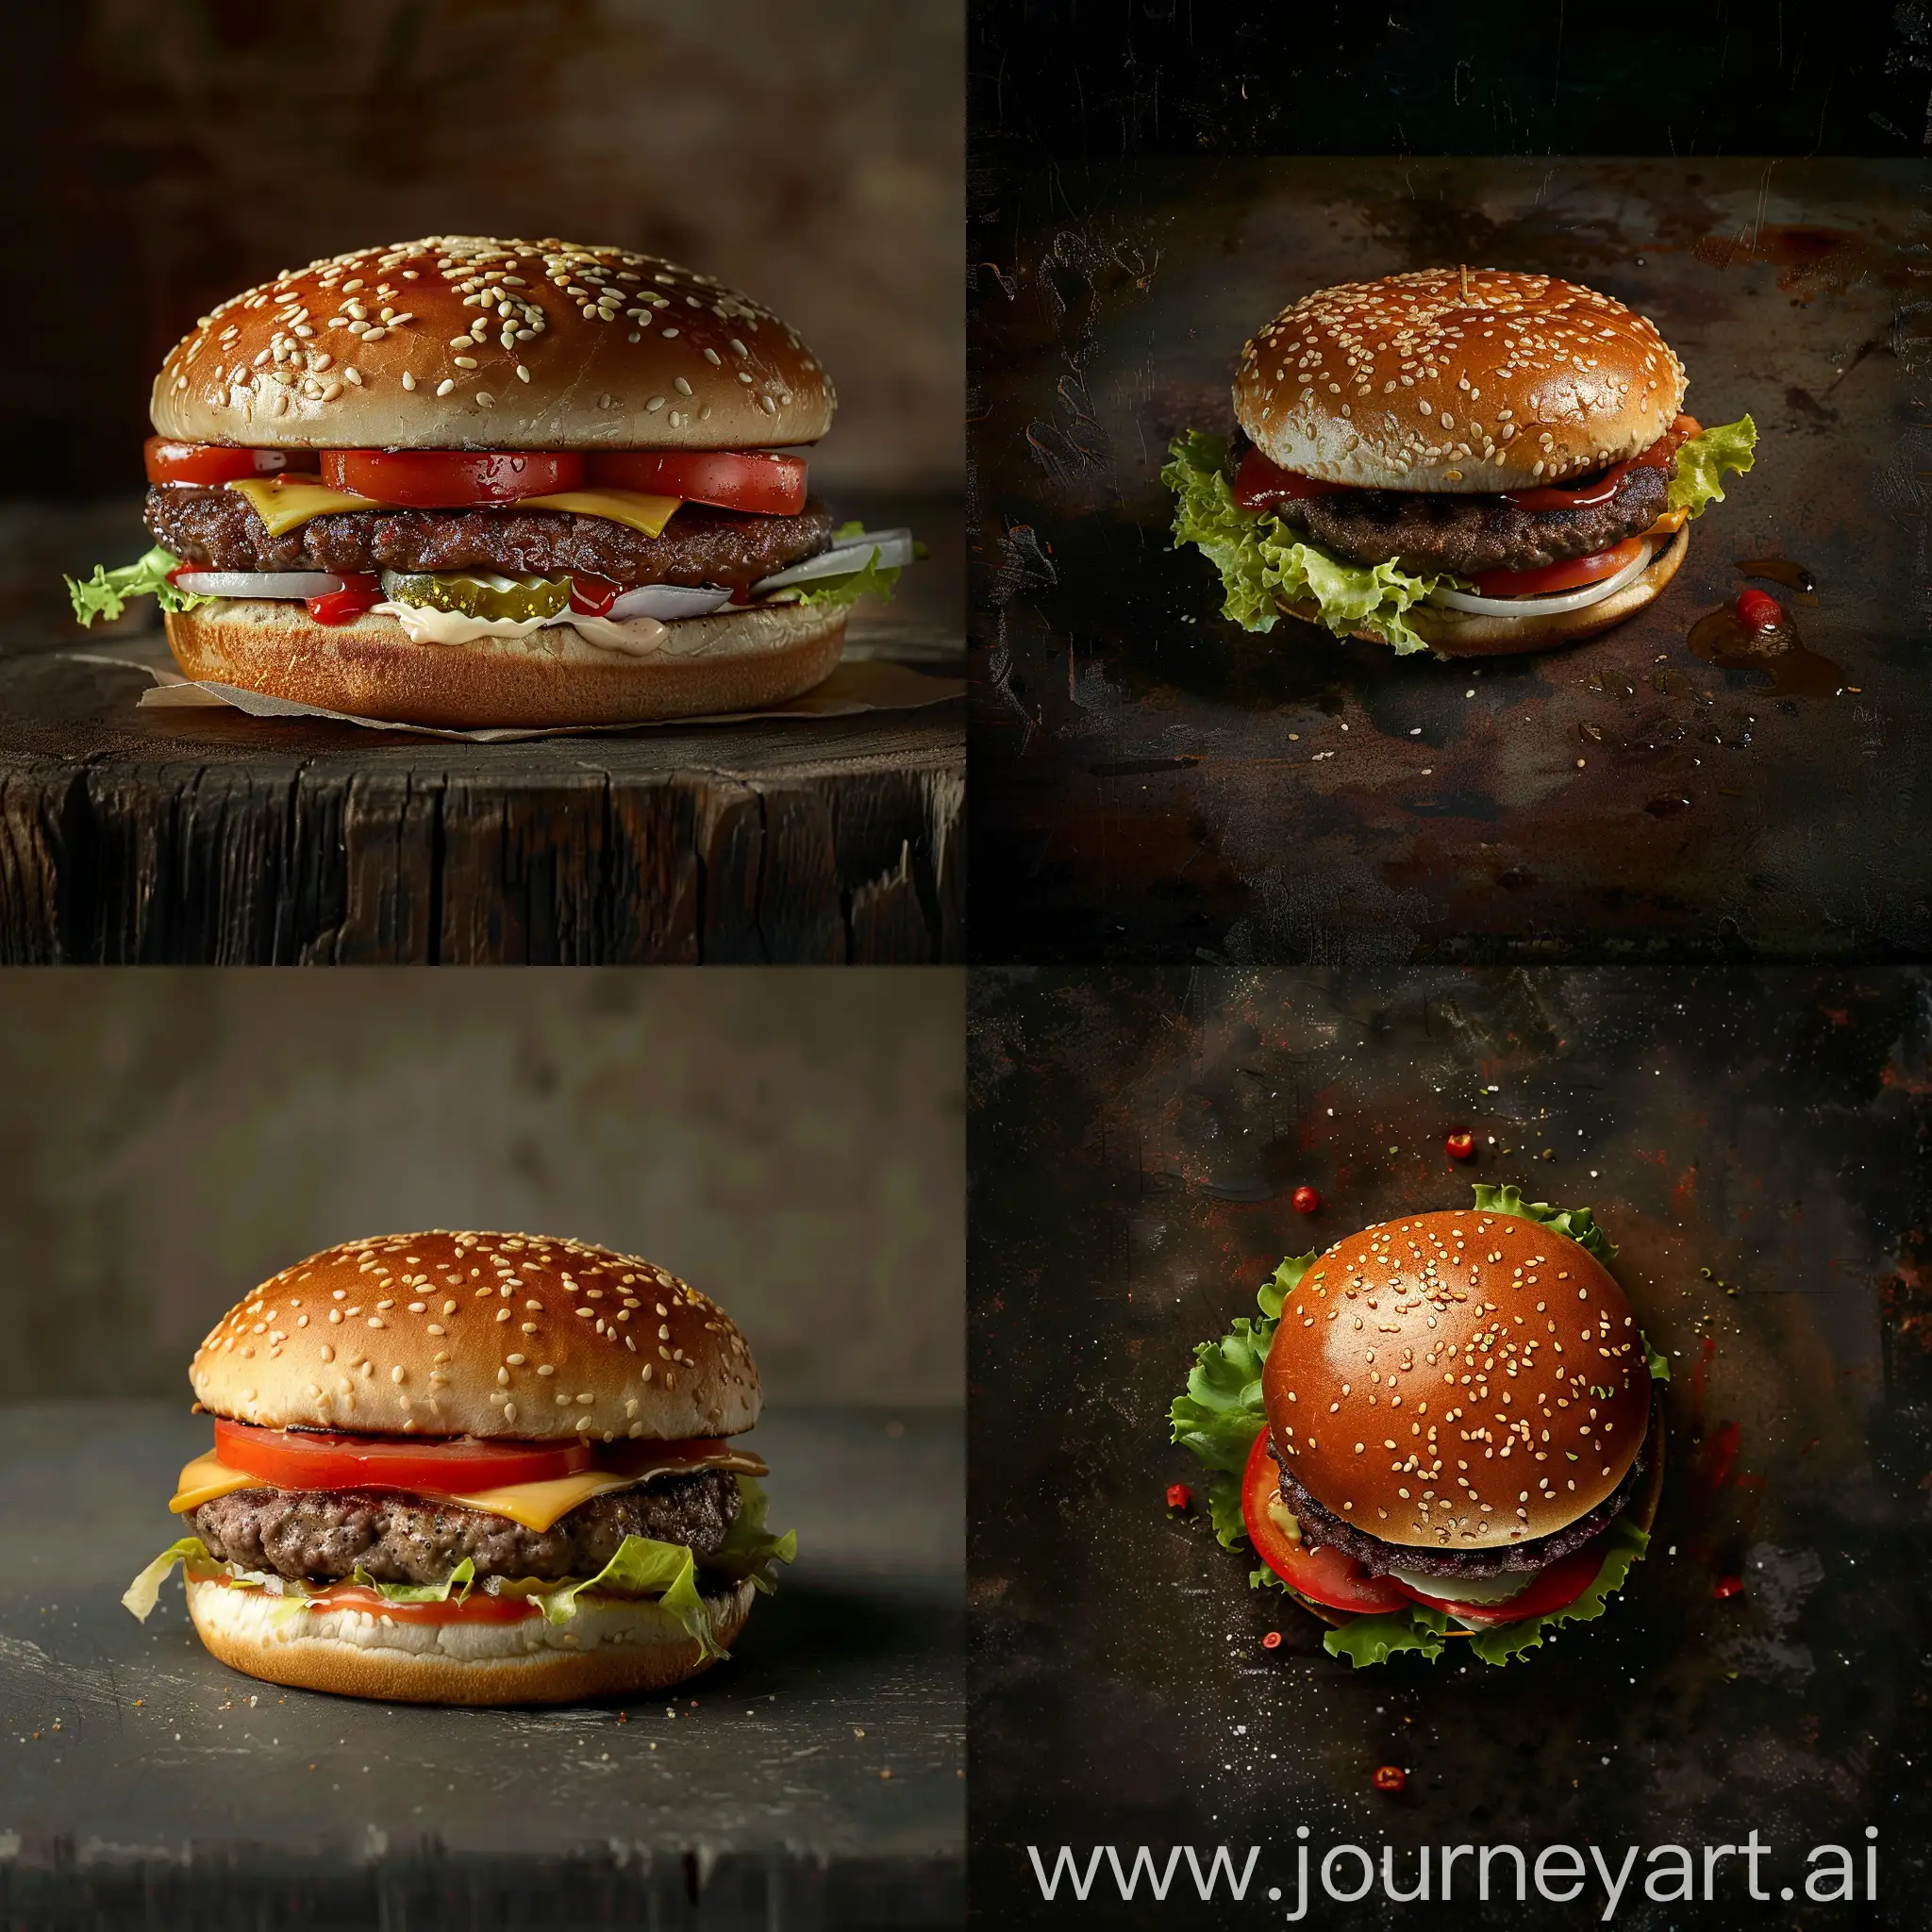 Realistic-Photography-of-a-Burger-Centered-in-the-Photo